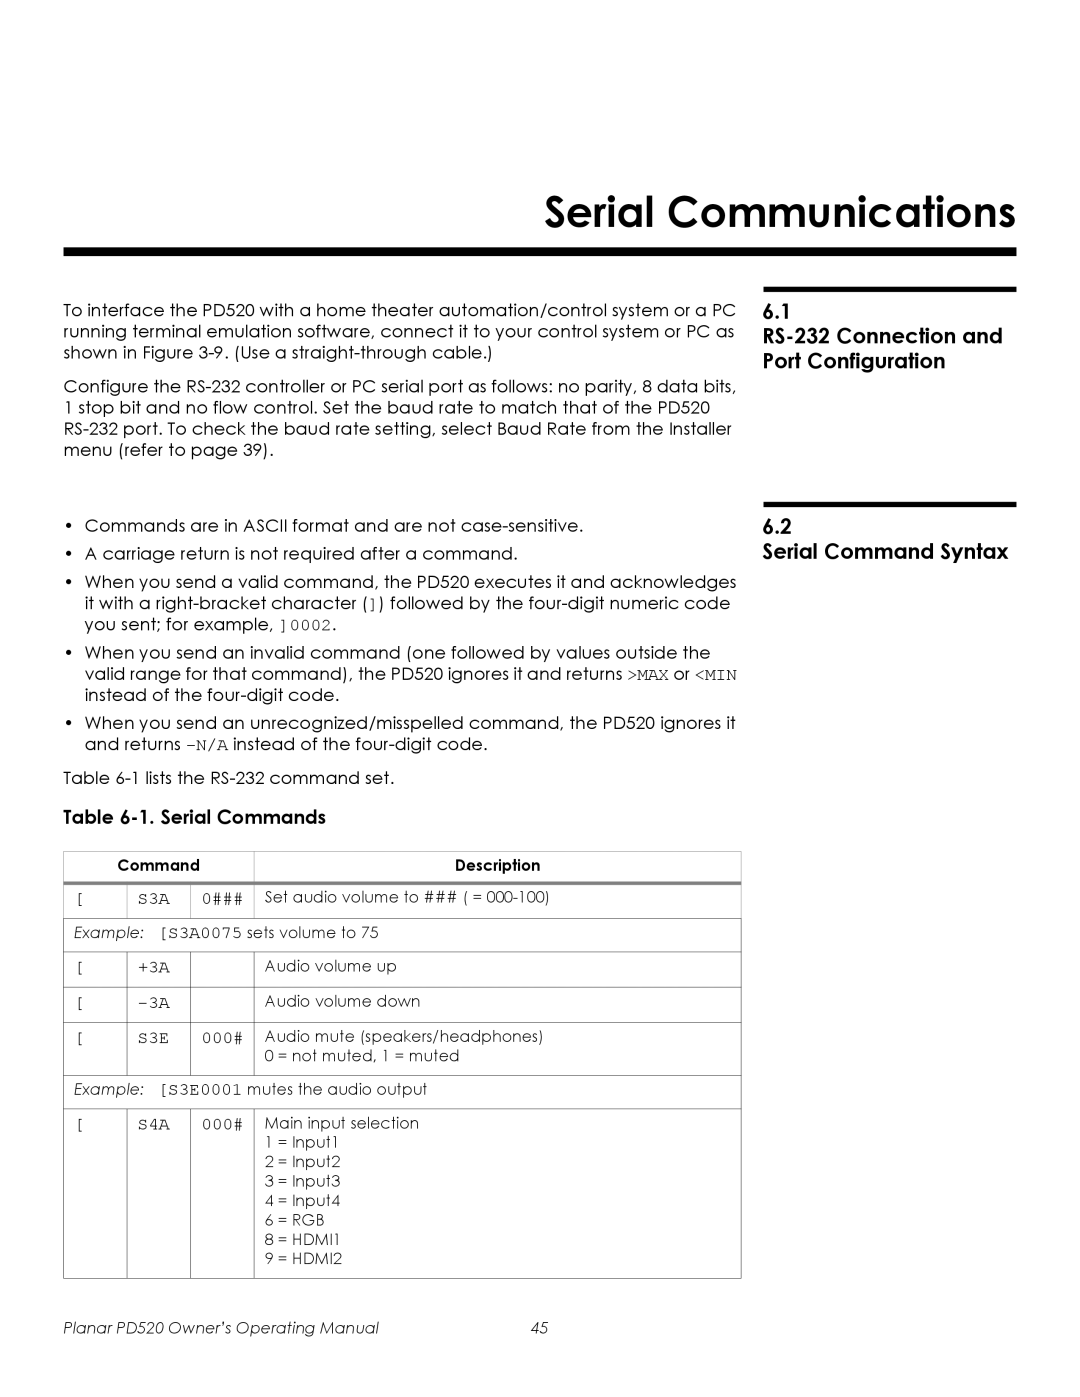 Planar PD520 Serial Communications, 6.1 RS-232Connection and Port Configuration, Serial Command Syntax, 1.Serial Commands 